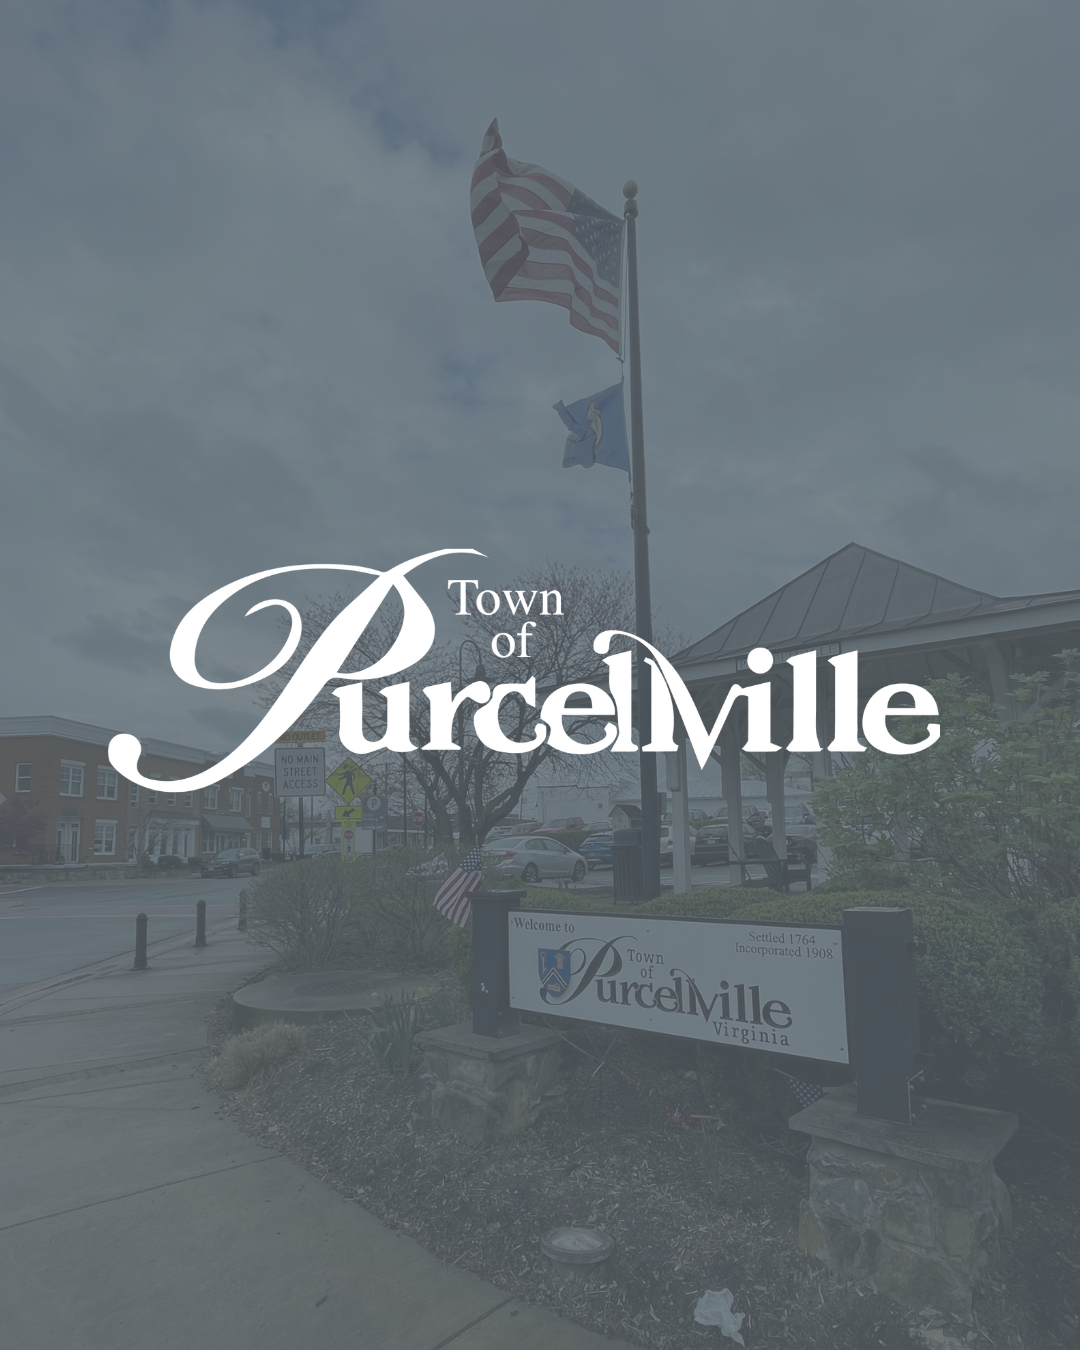 The Town of Purcellville